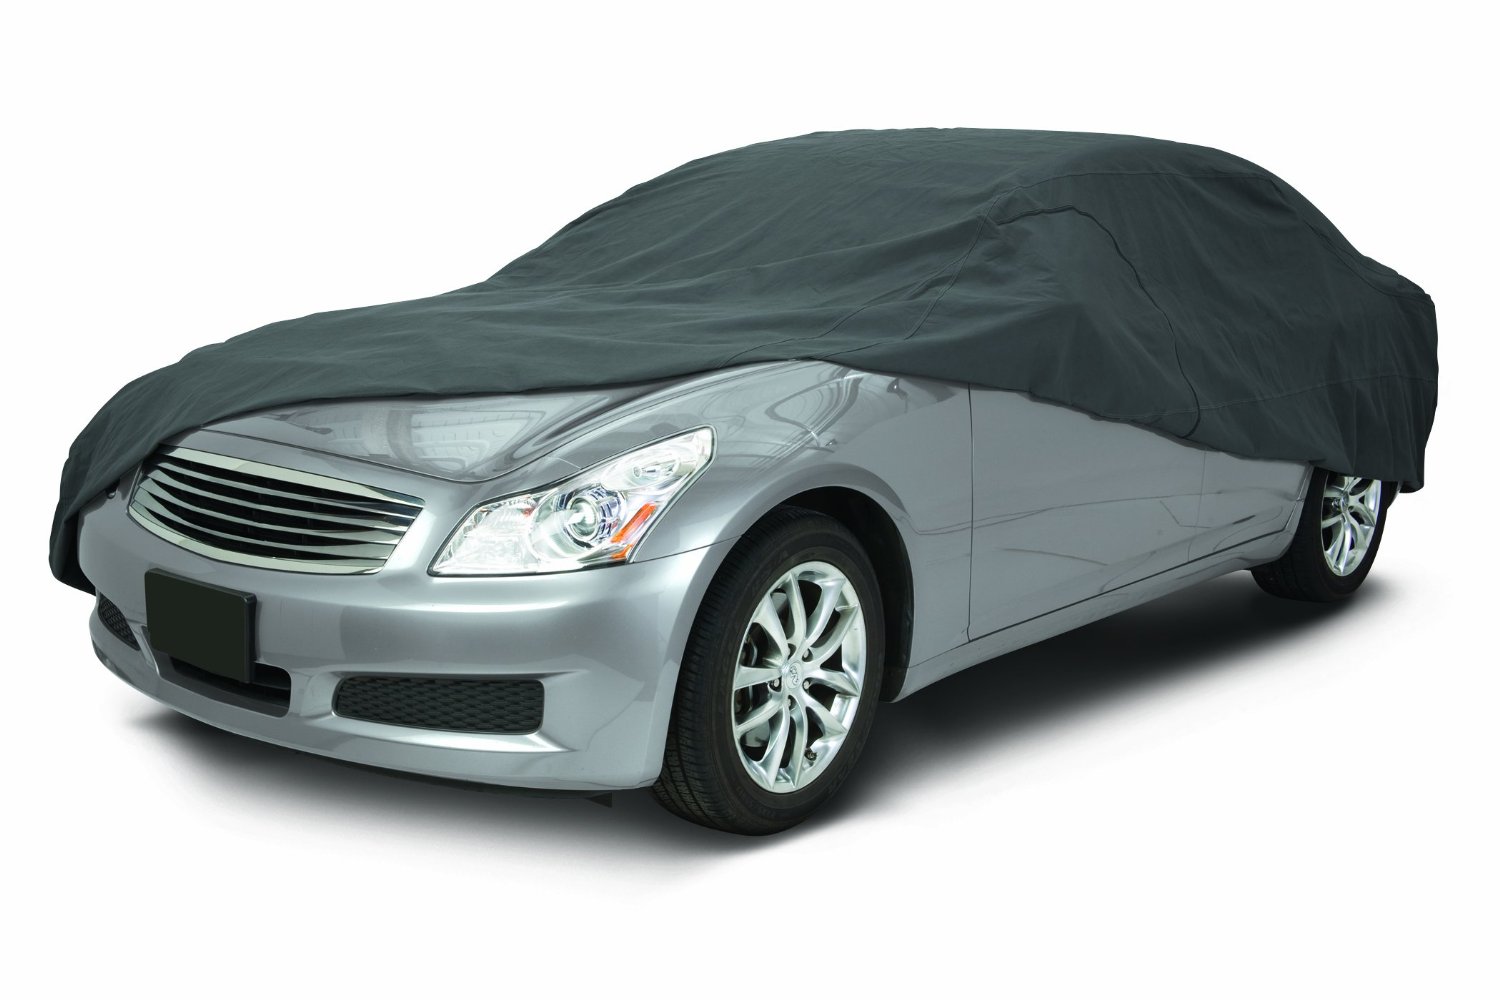 #4. Classic Accessories 10-014-261001-00 Outdoor Car Cover